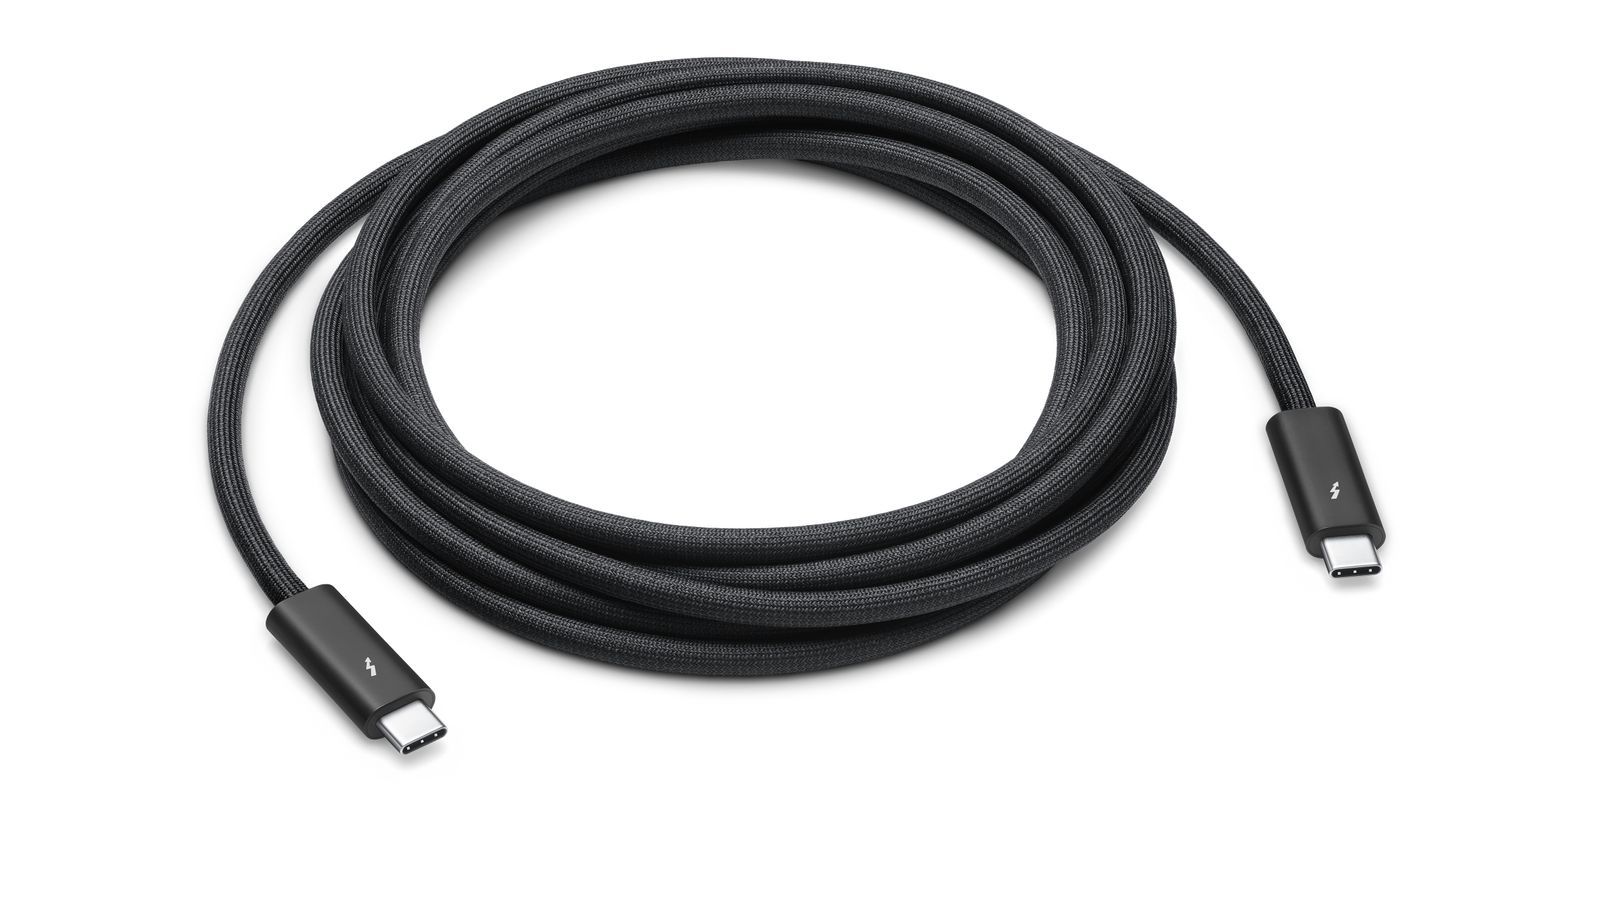 Apple's New Studio Display Includes 1-Meter Thunderbolt Cable With 3-Meter Optio..